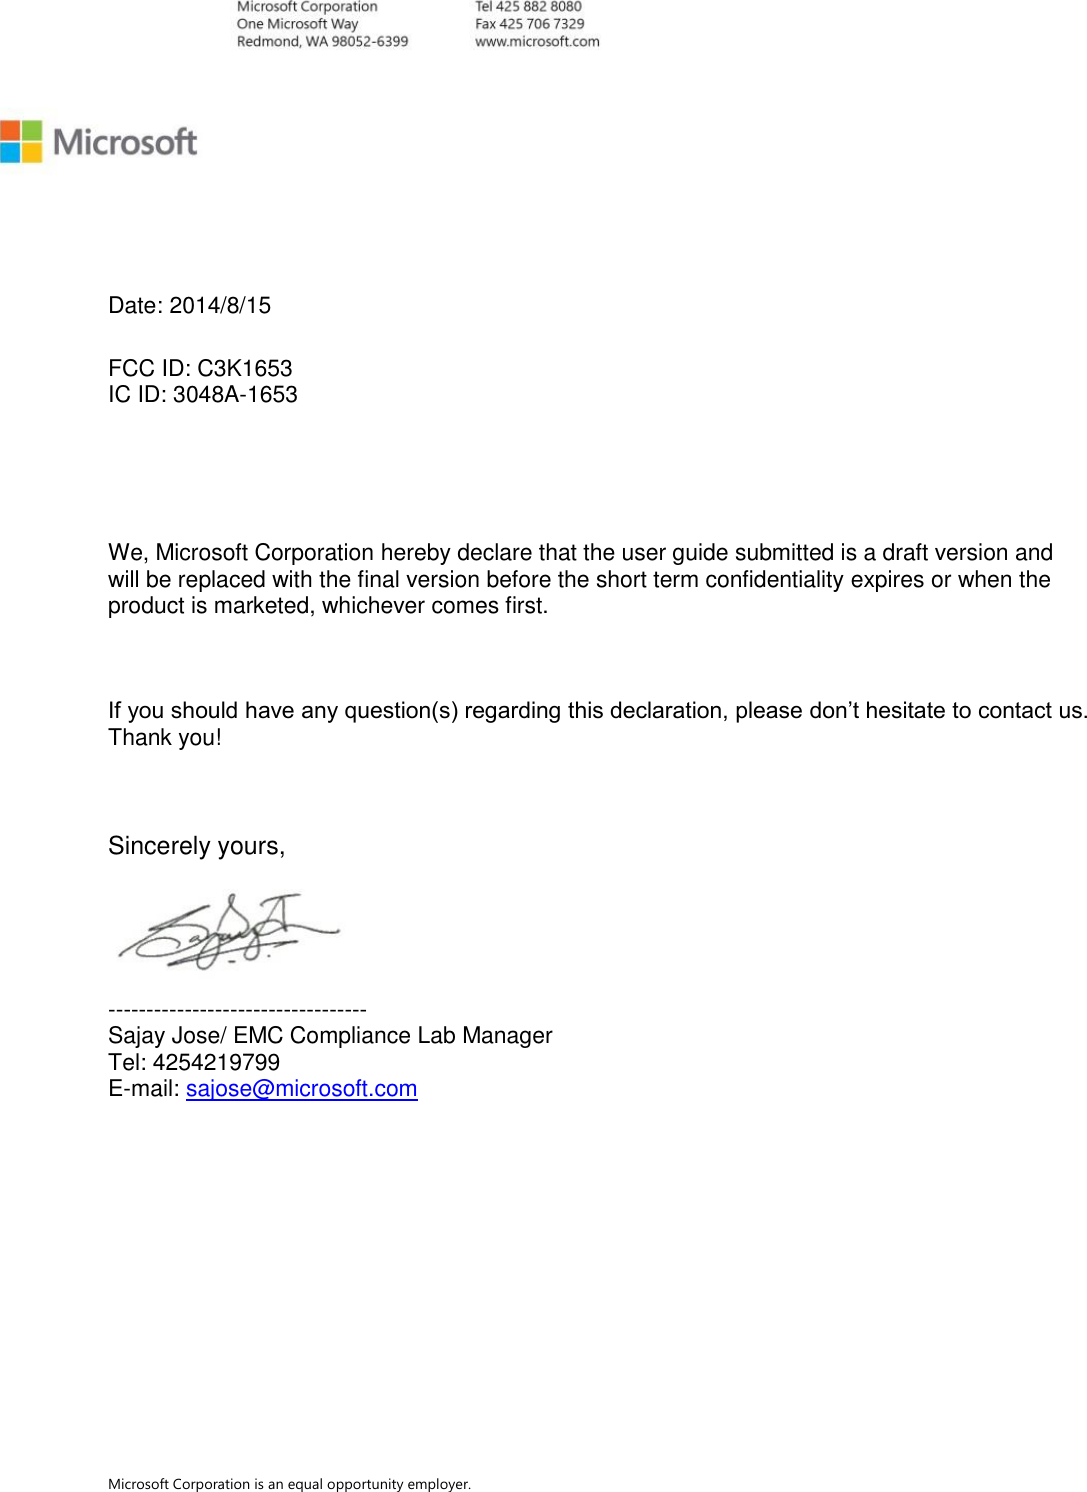  Microsoft Corporation is an equal opportunity employer.   Date: 2014/8/15        FCC ID: C3K1653 IC ID: 3048A-1653      We, Microsoft Corporation hereby declare that the user guide submitted is a draft version and will be replaced with the final version before the short term confidentiality expires or when the product is marketed, whichever comes first.     If you should have any question(s) regarding this declaration, please don’t hesitate to contact us. Thank you!    Sincerely yours,   ---------------------------------- Sajay Jose/ EMC Compliance Lab Manager Tel: 4254219799 E-mail: sajose@microsoft.com  